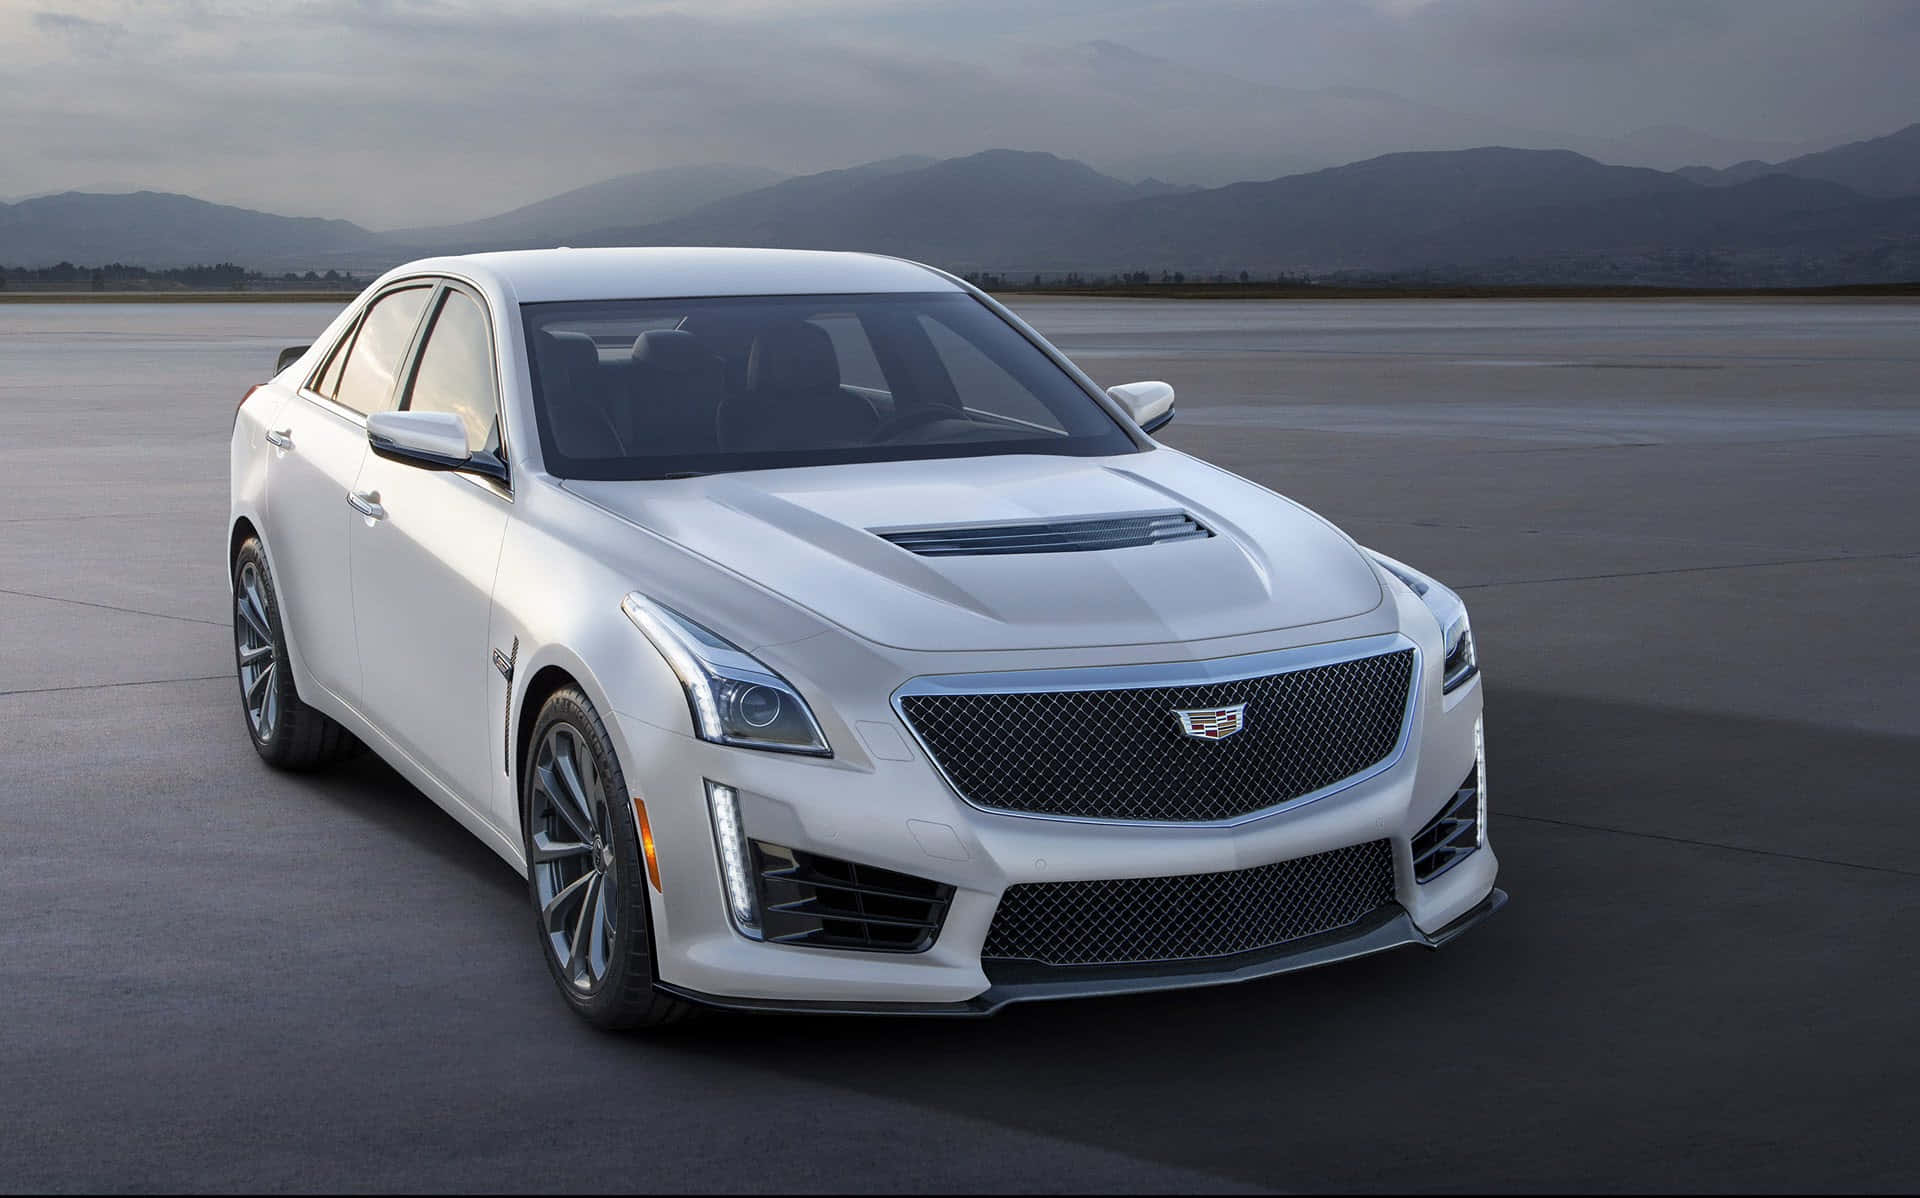 Stunning and Sleek Cadillac CTS in a Scenic Outdoor Setting Wallpaper